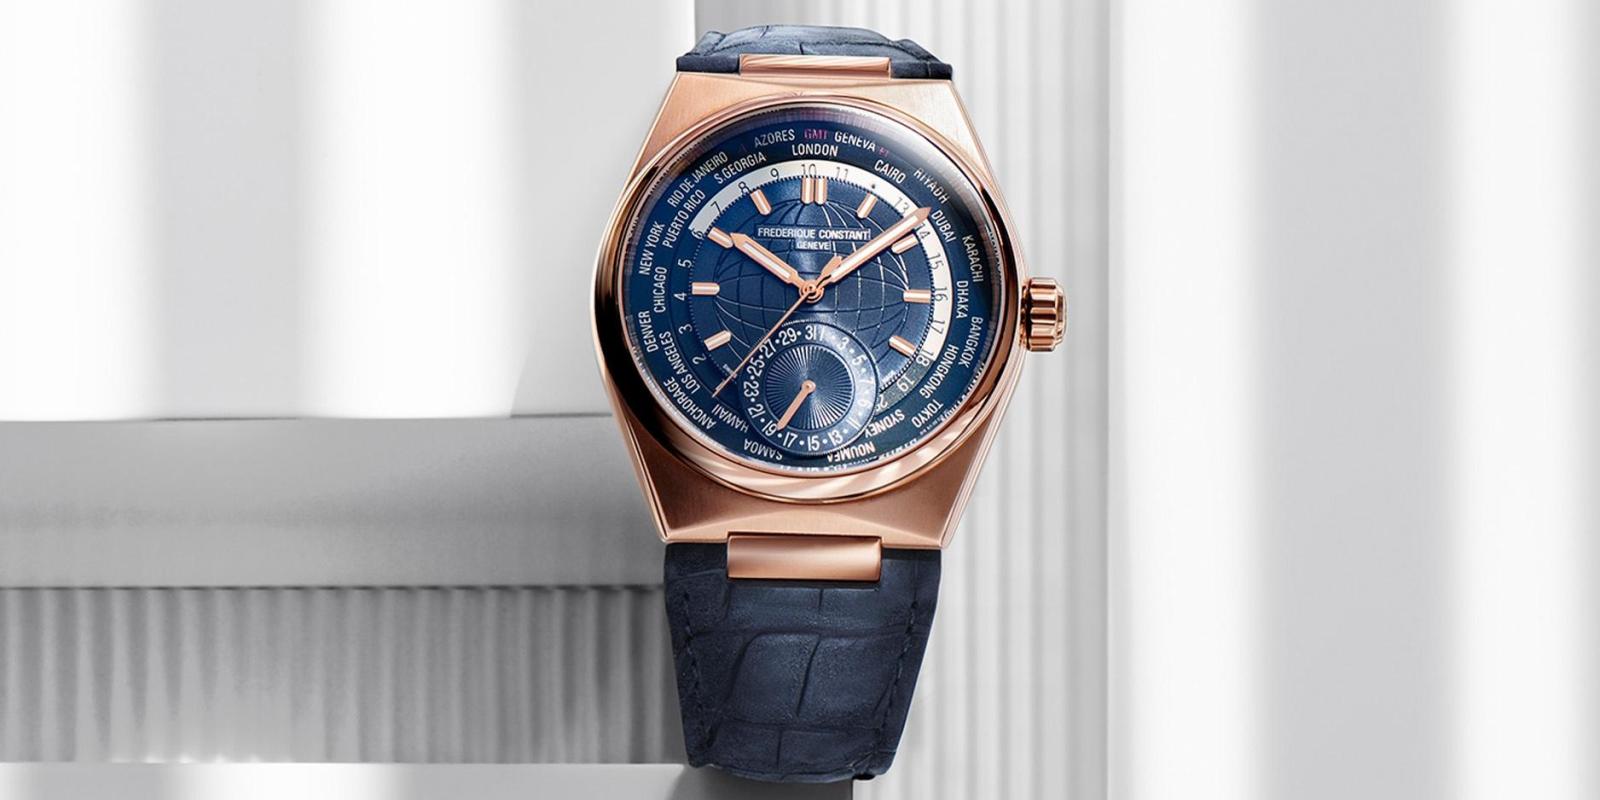 The Frédérique Constant Highlife Worldtimer Manufacture 35th Anniversary limited edition in rose gold.